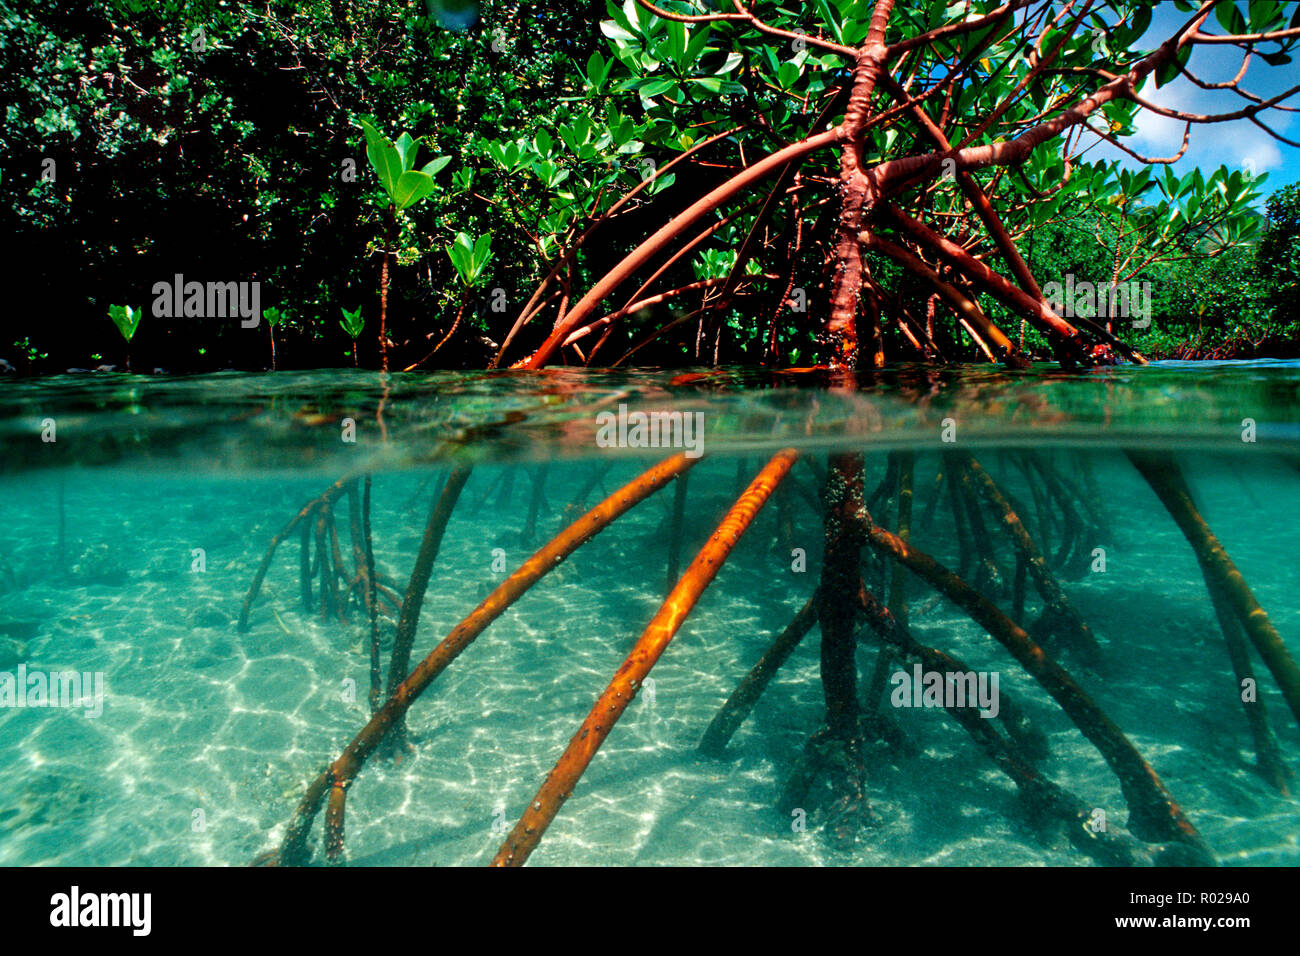 Red mangrove (Rhizophora stylosa) plants grow at the water's edge and provide food, shelter and nutrients for growing fishes.  Fiji, Indo-Pacific Stock Photo